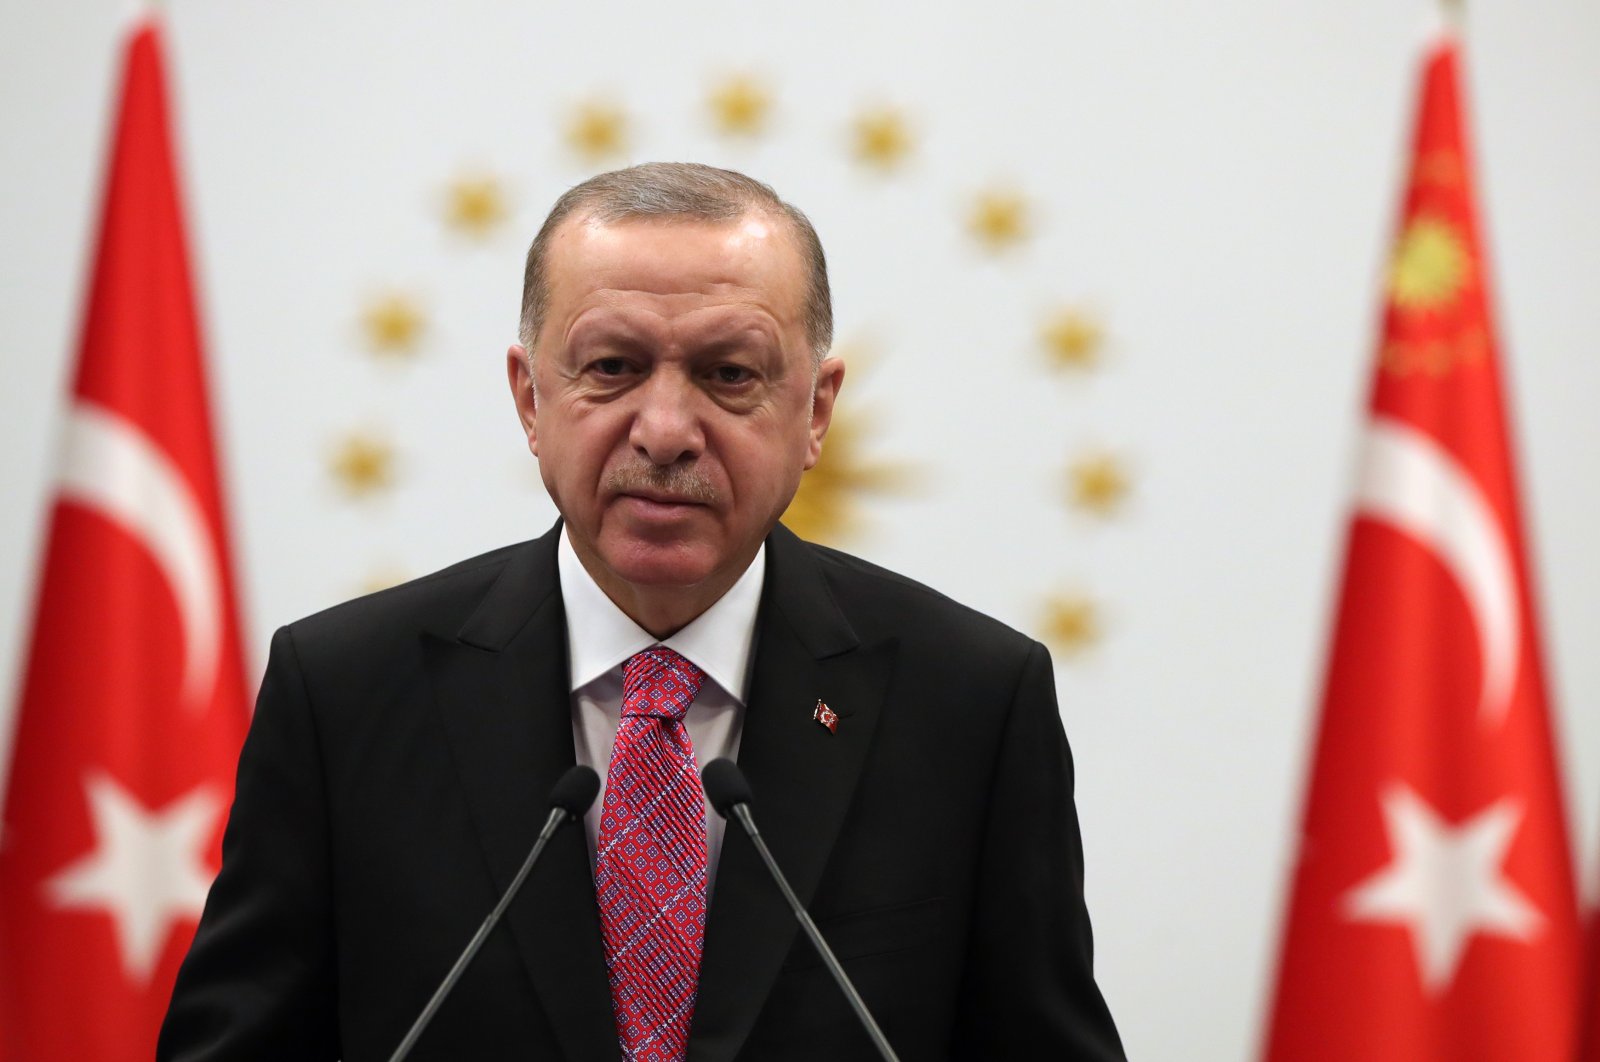 Turkey hopes for better relations with Israel, Erdoğan says